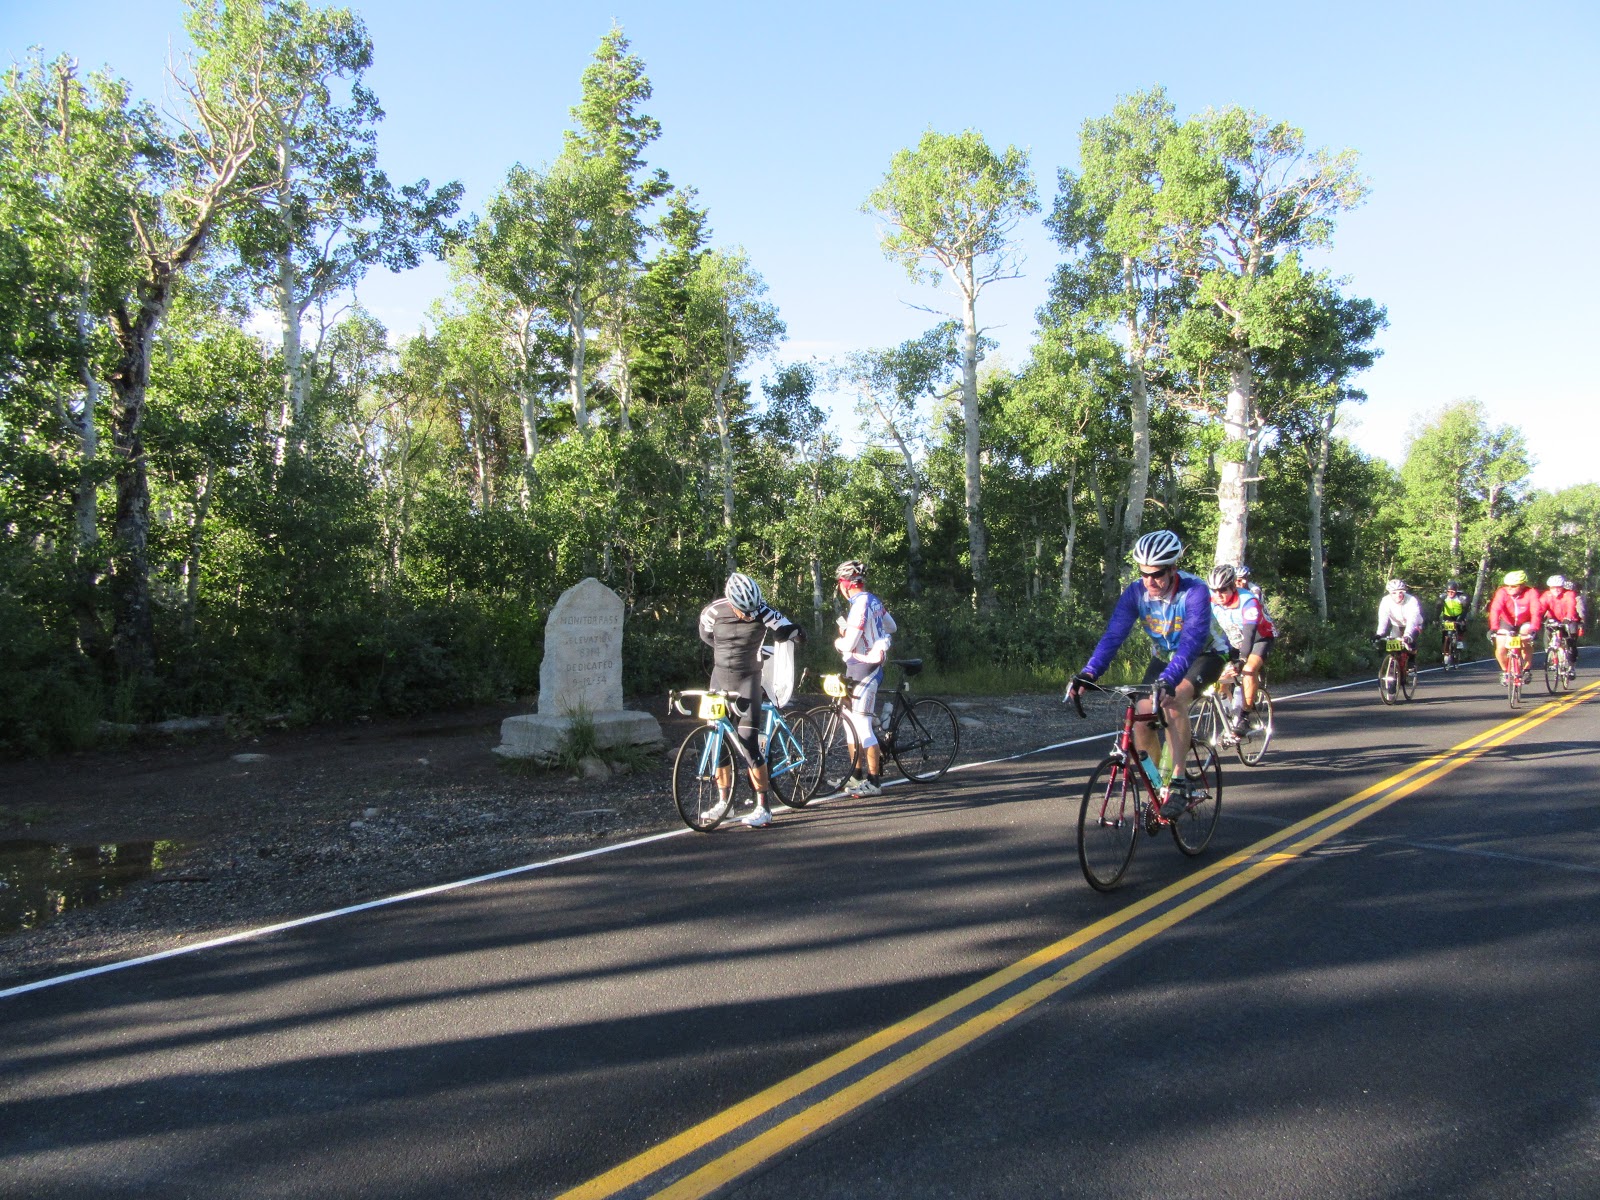 Cyclists on bikes next to stone sign during Monitor Pass East portion of death ride